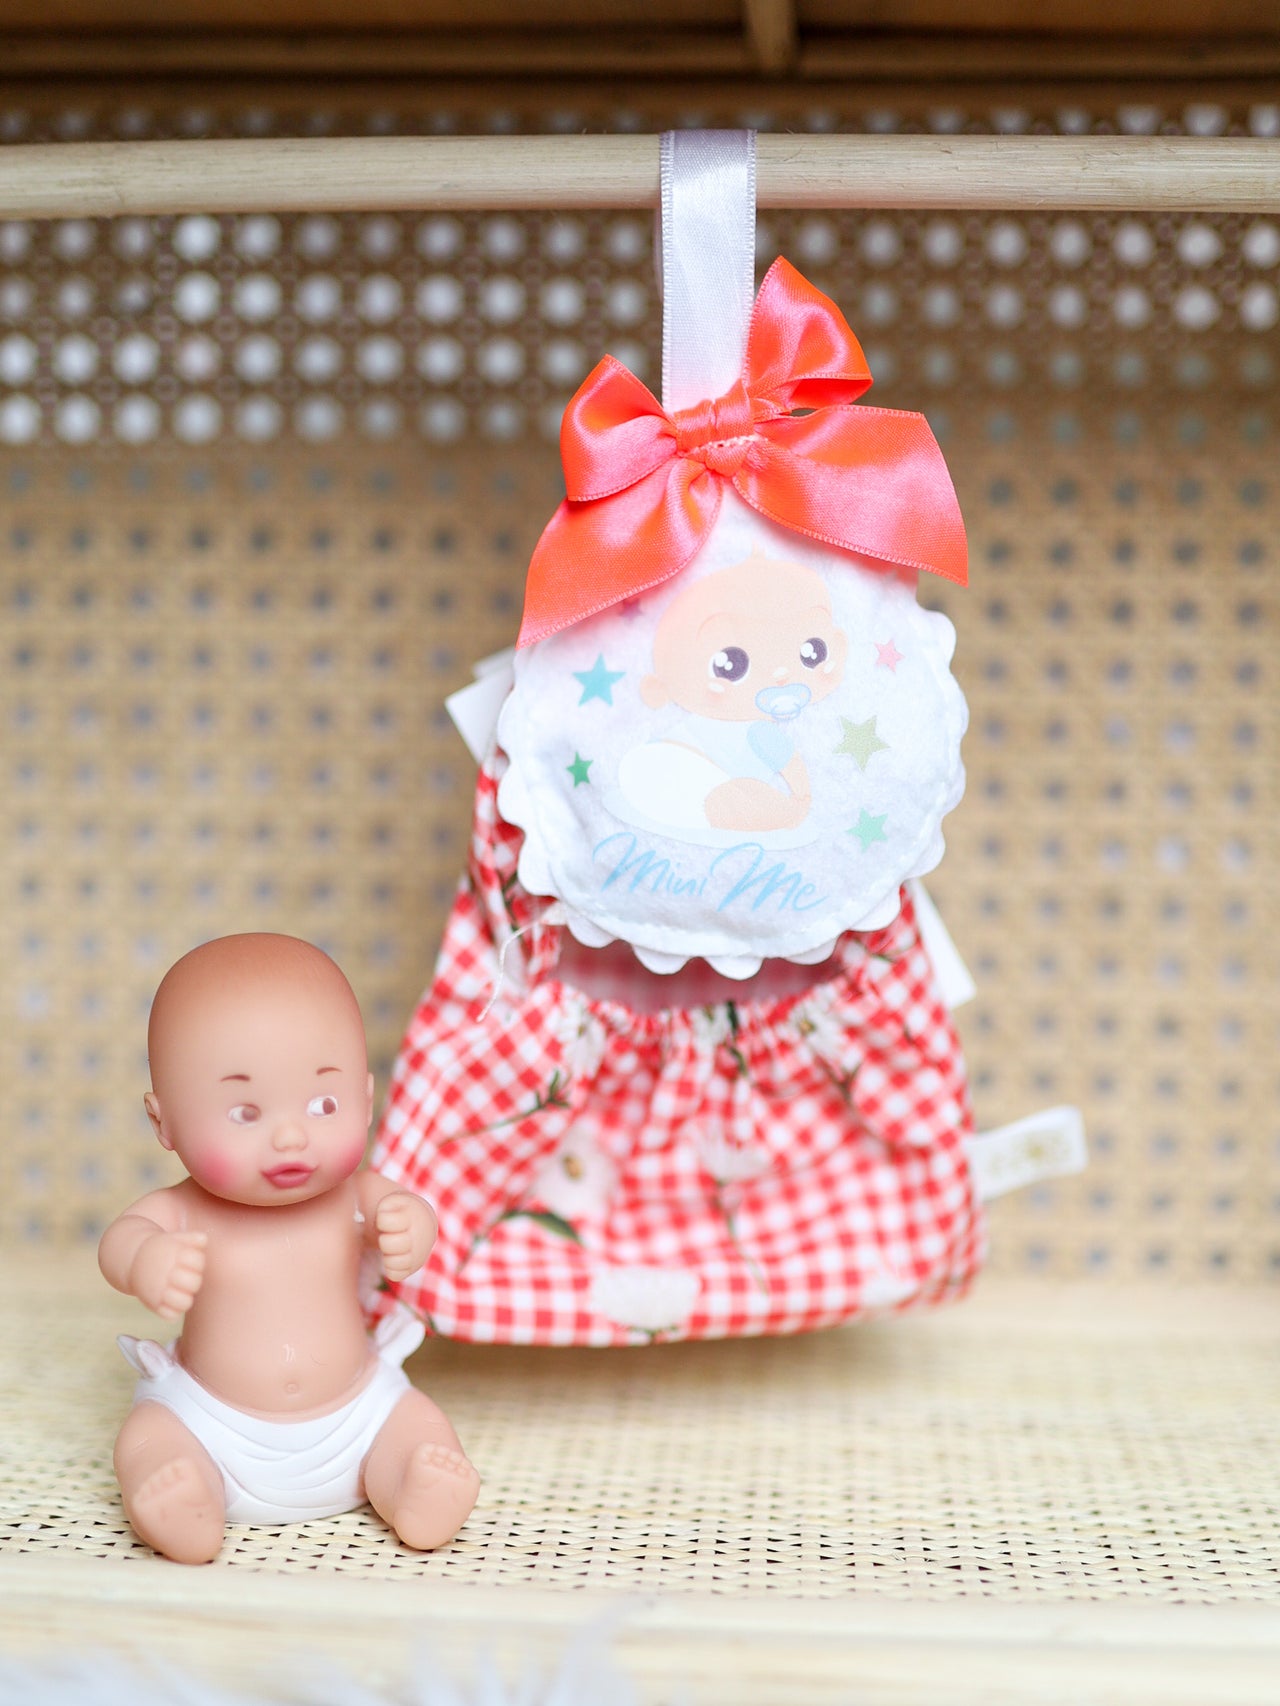 Mini Me Babies - 3.9" Dolls with Clip-on Fabric Pouch